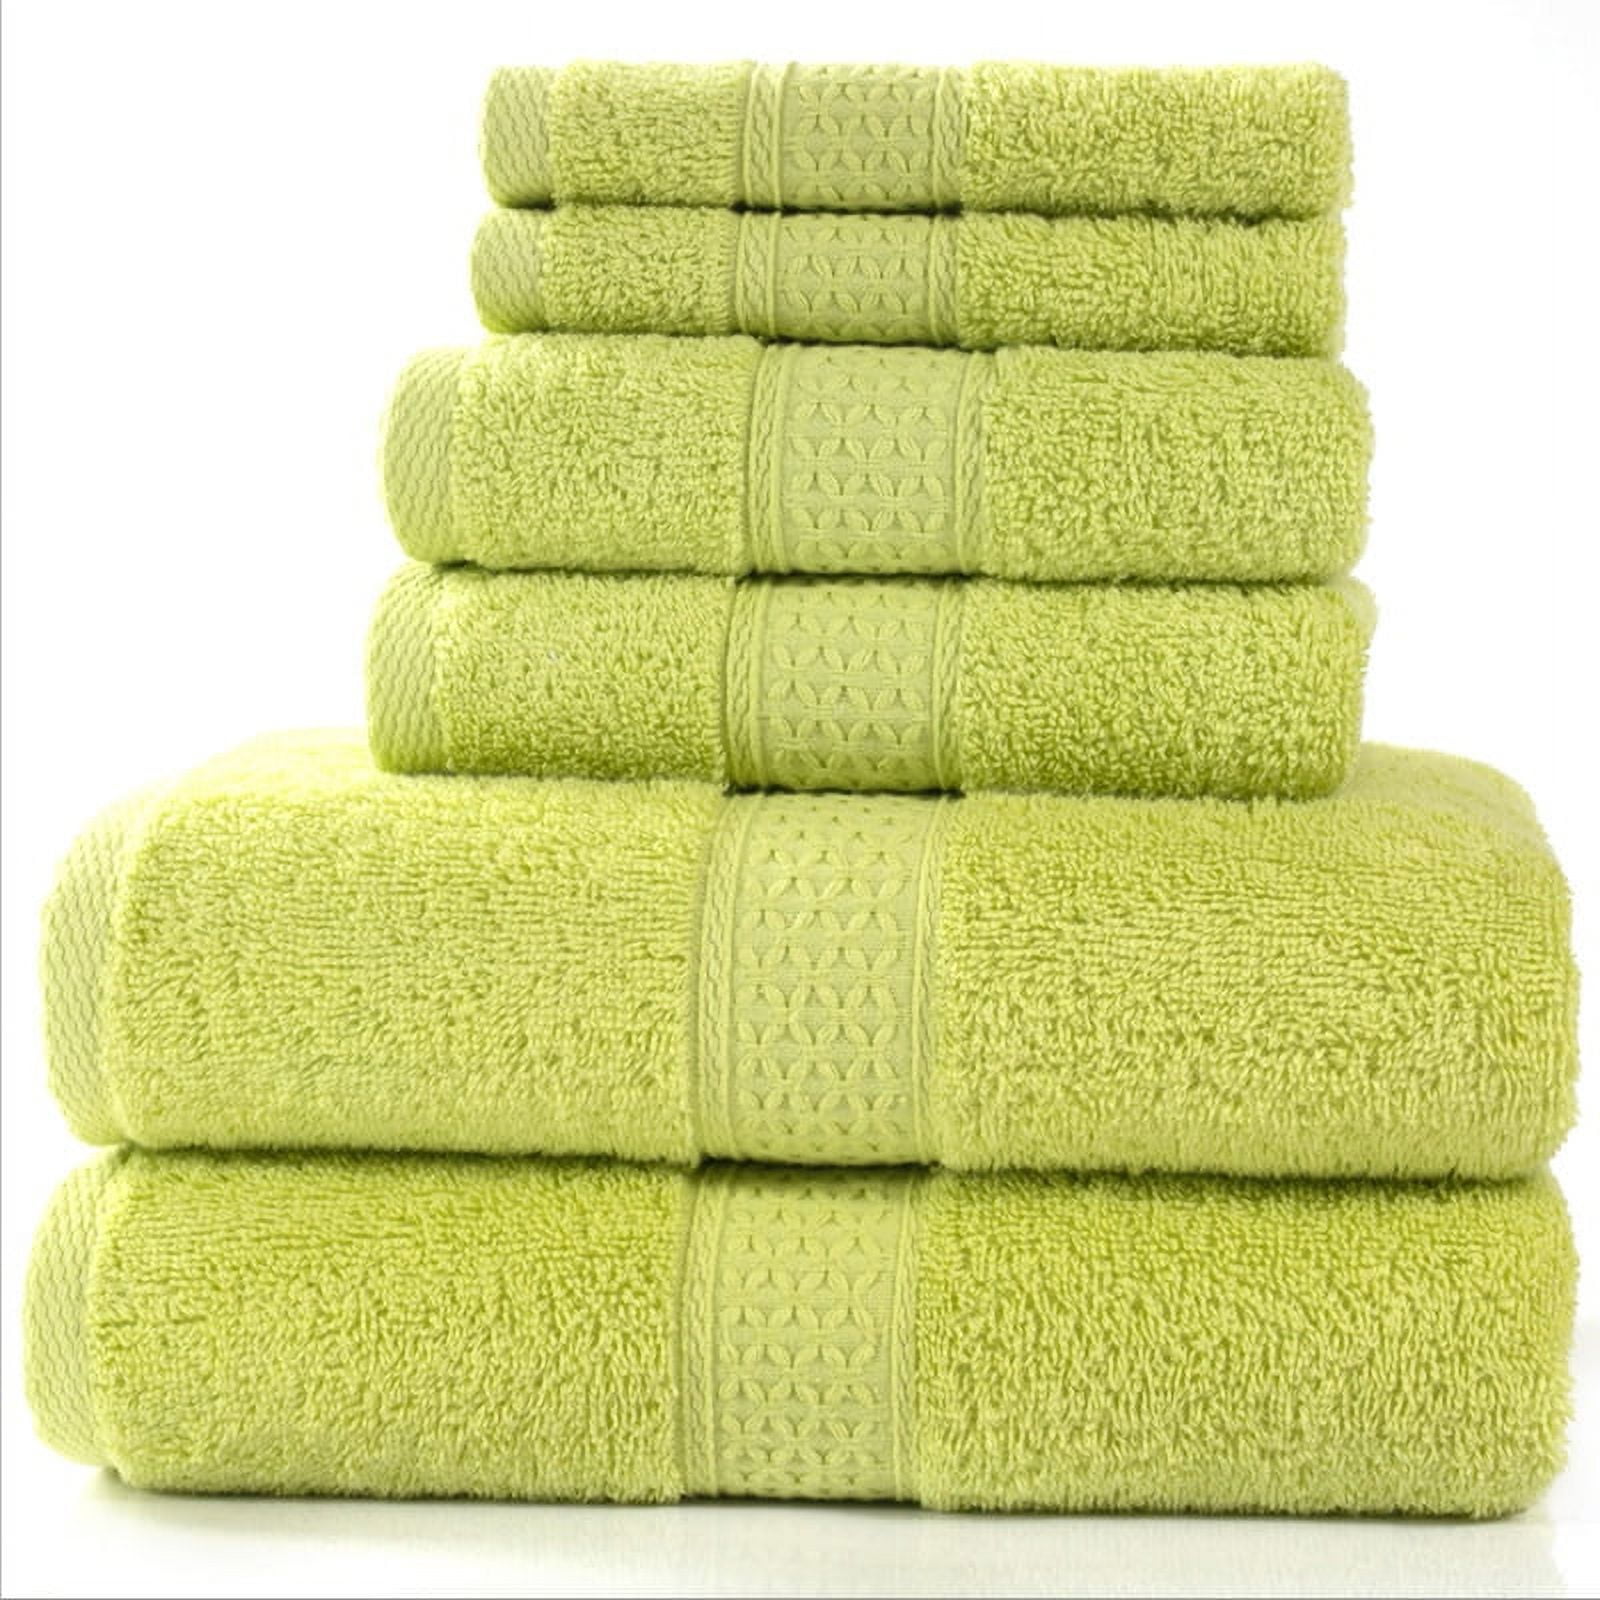 Homgreen Chakir Turkish Linens Luxury Spa and Hotel Quality